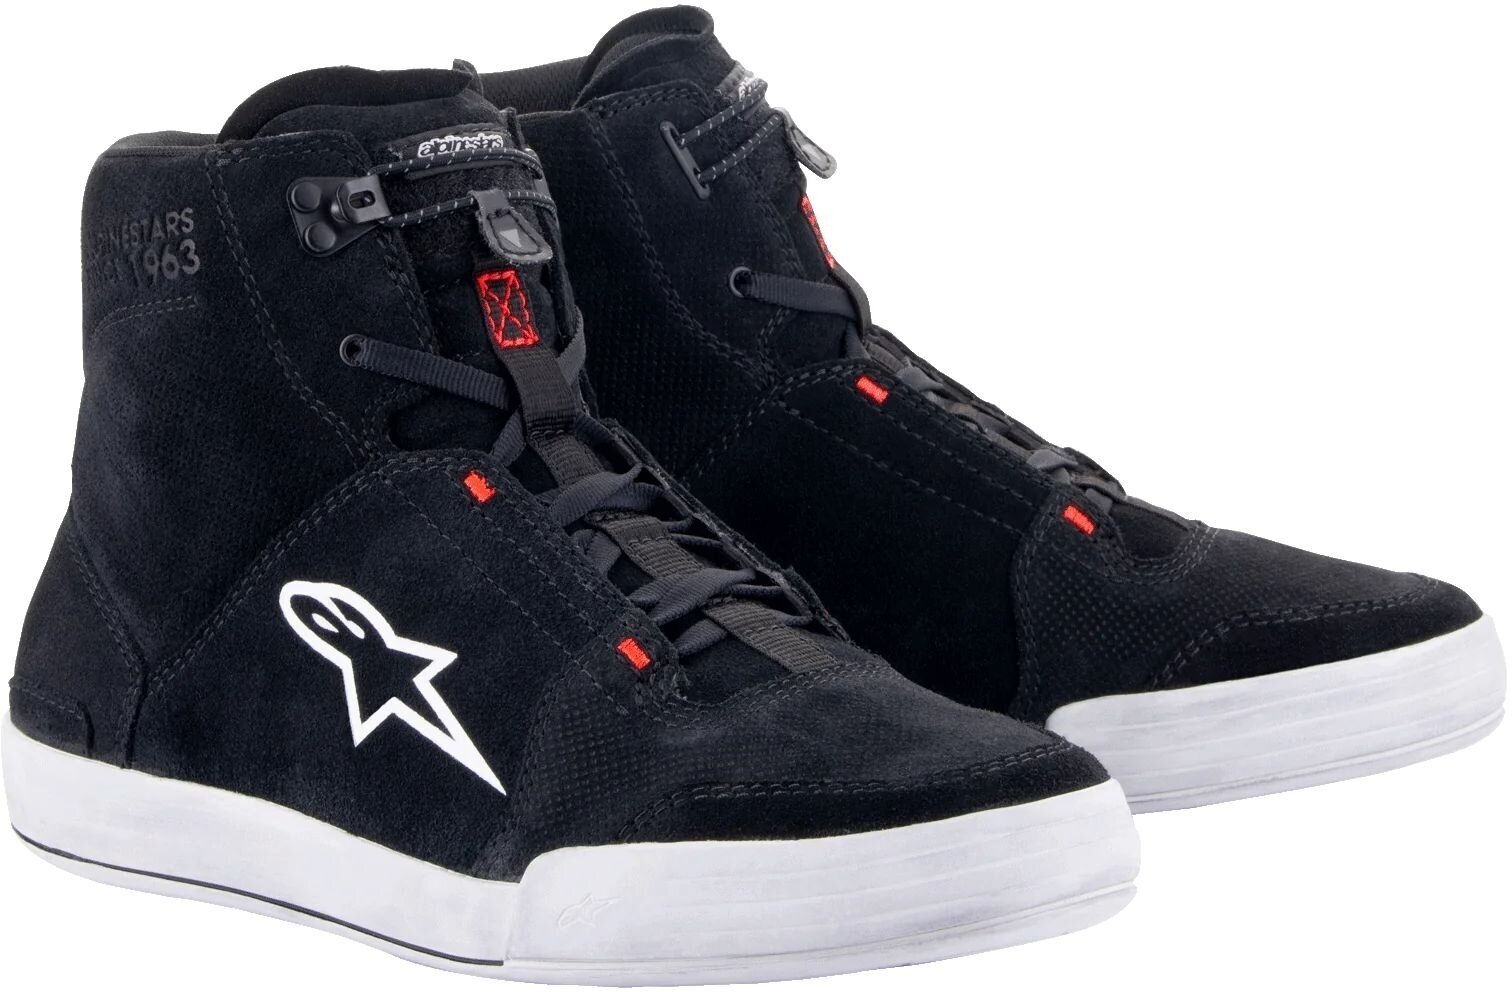 Boty Alpinestars Chrome Shoes Black/Cool Gray/Red Fluo 42 Boty